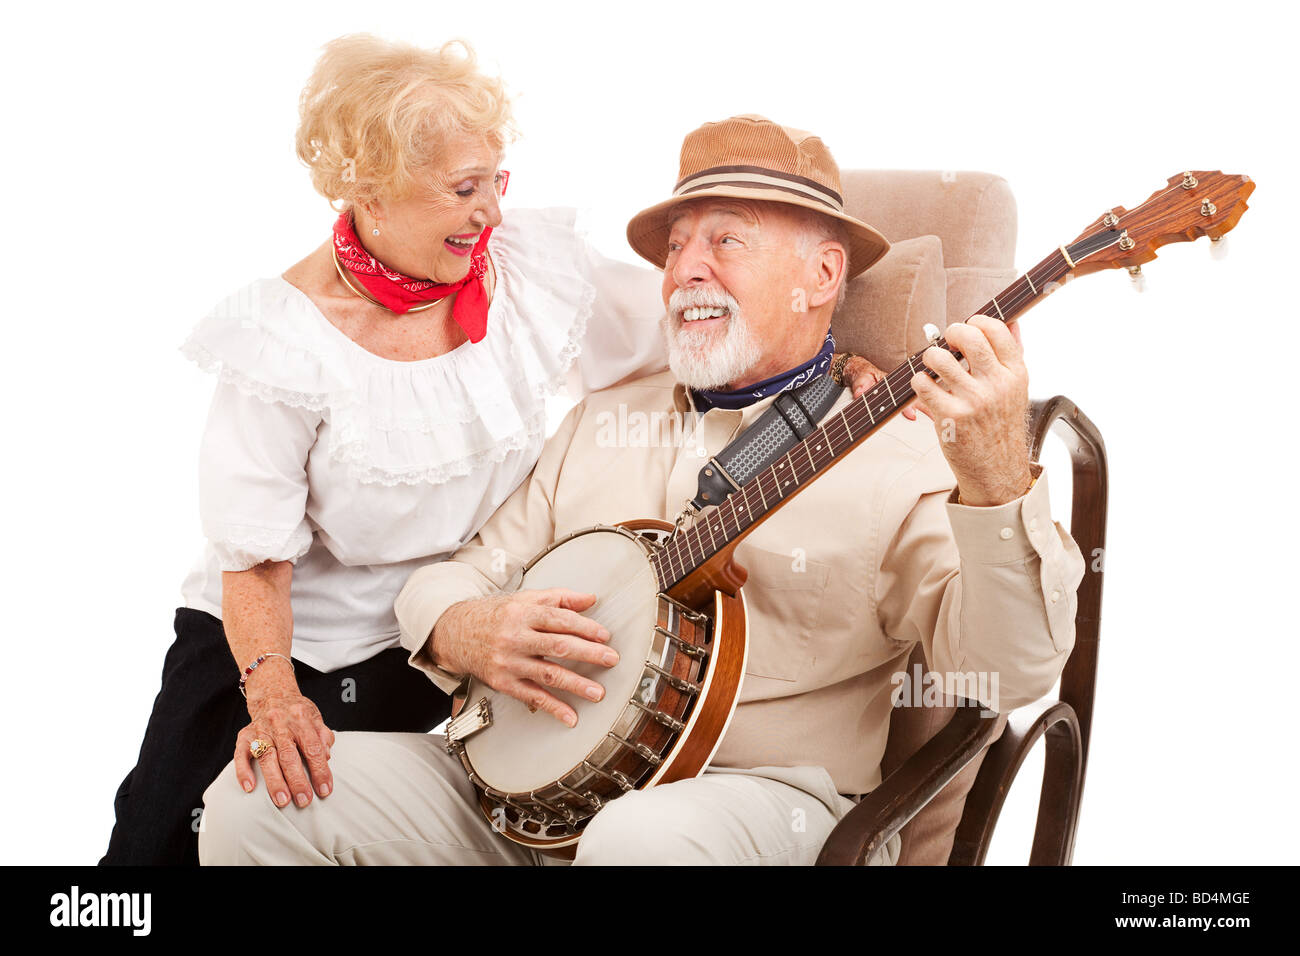 Senior man courts his lady love by playing banjo for her Isolated on white Stock Photo